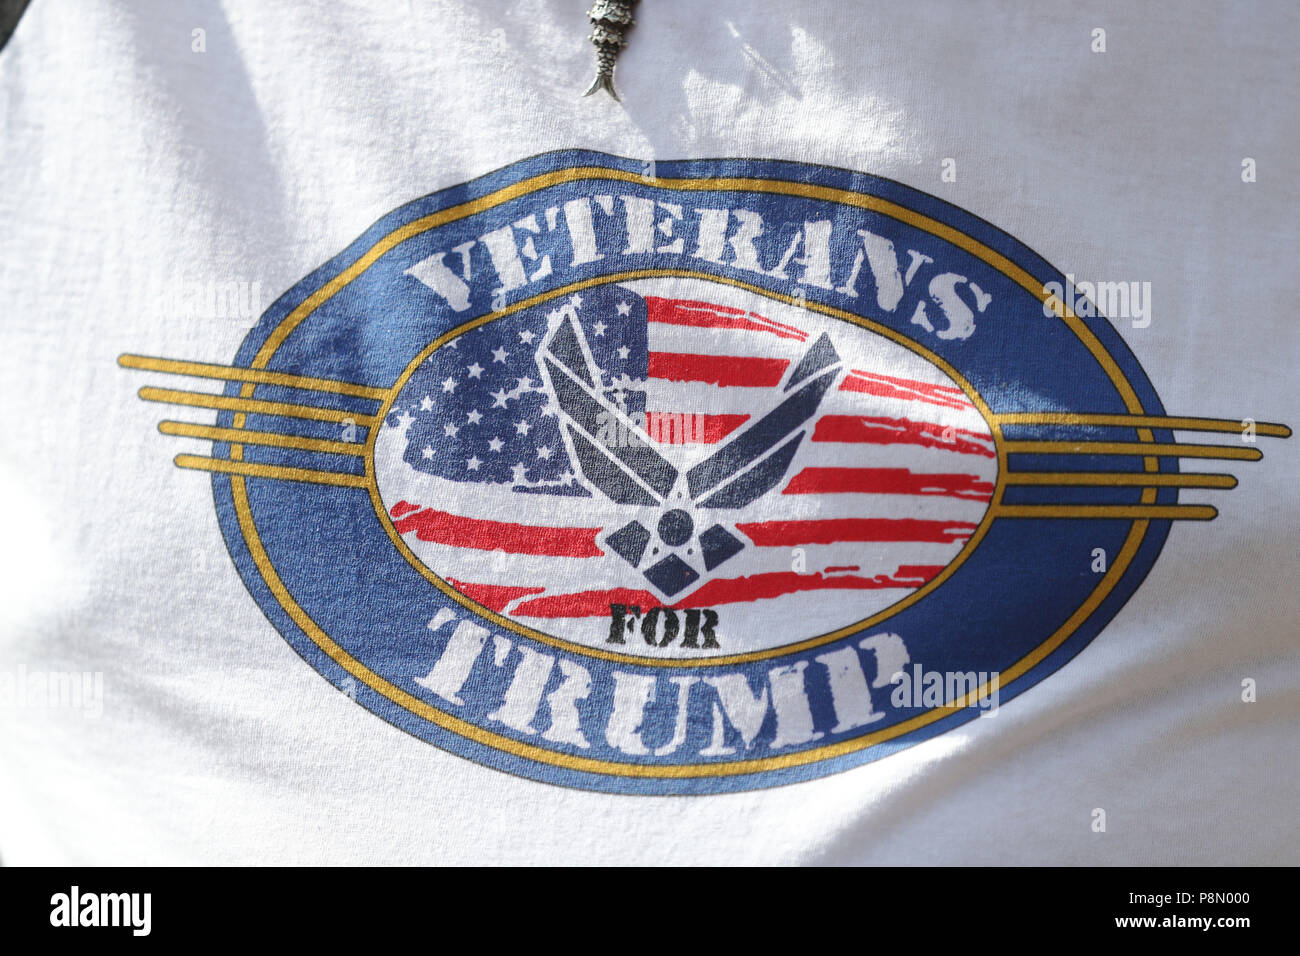 A Trump supporter wears a Veterans for Trump t-shirt outside the entrance to Blenheim Palace, Oxfordshire, ahead of the dinner hosted by Prime Minister Theresa May for US President Donald Trump, as part of his visit to the UK. Stock Photo